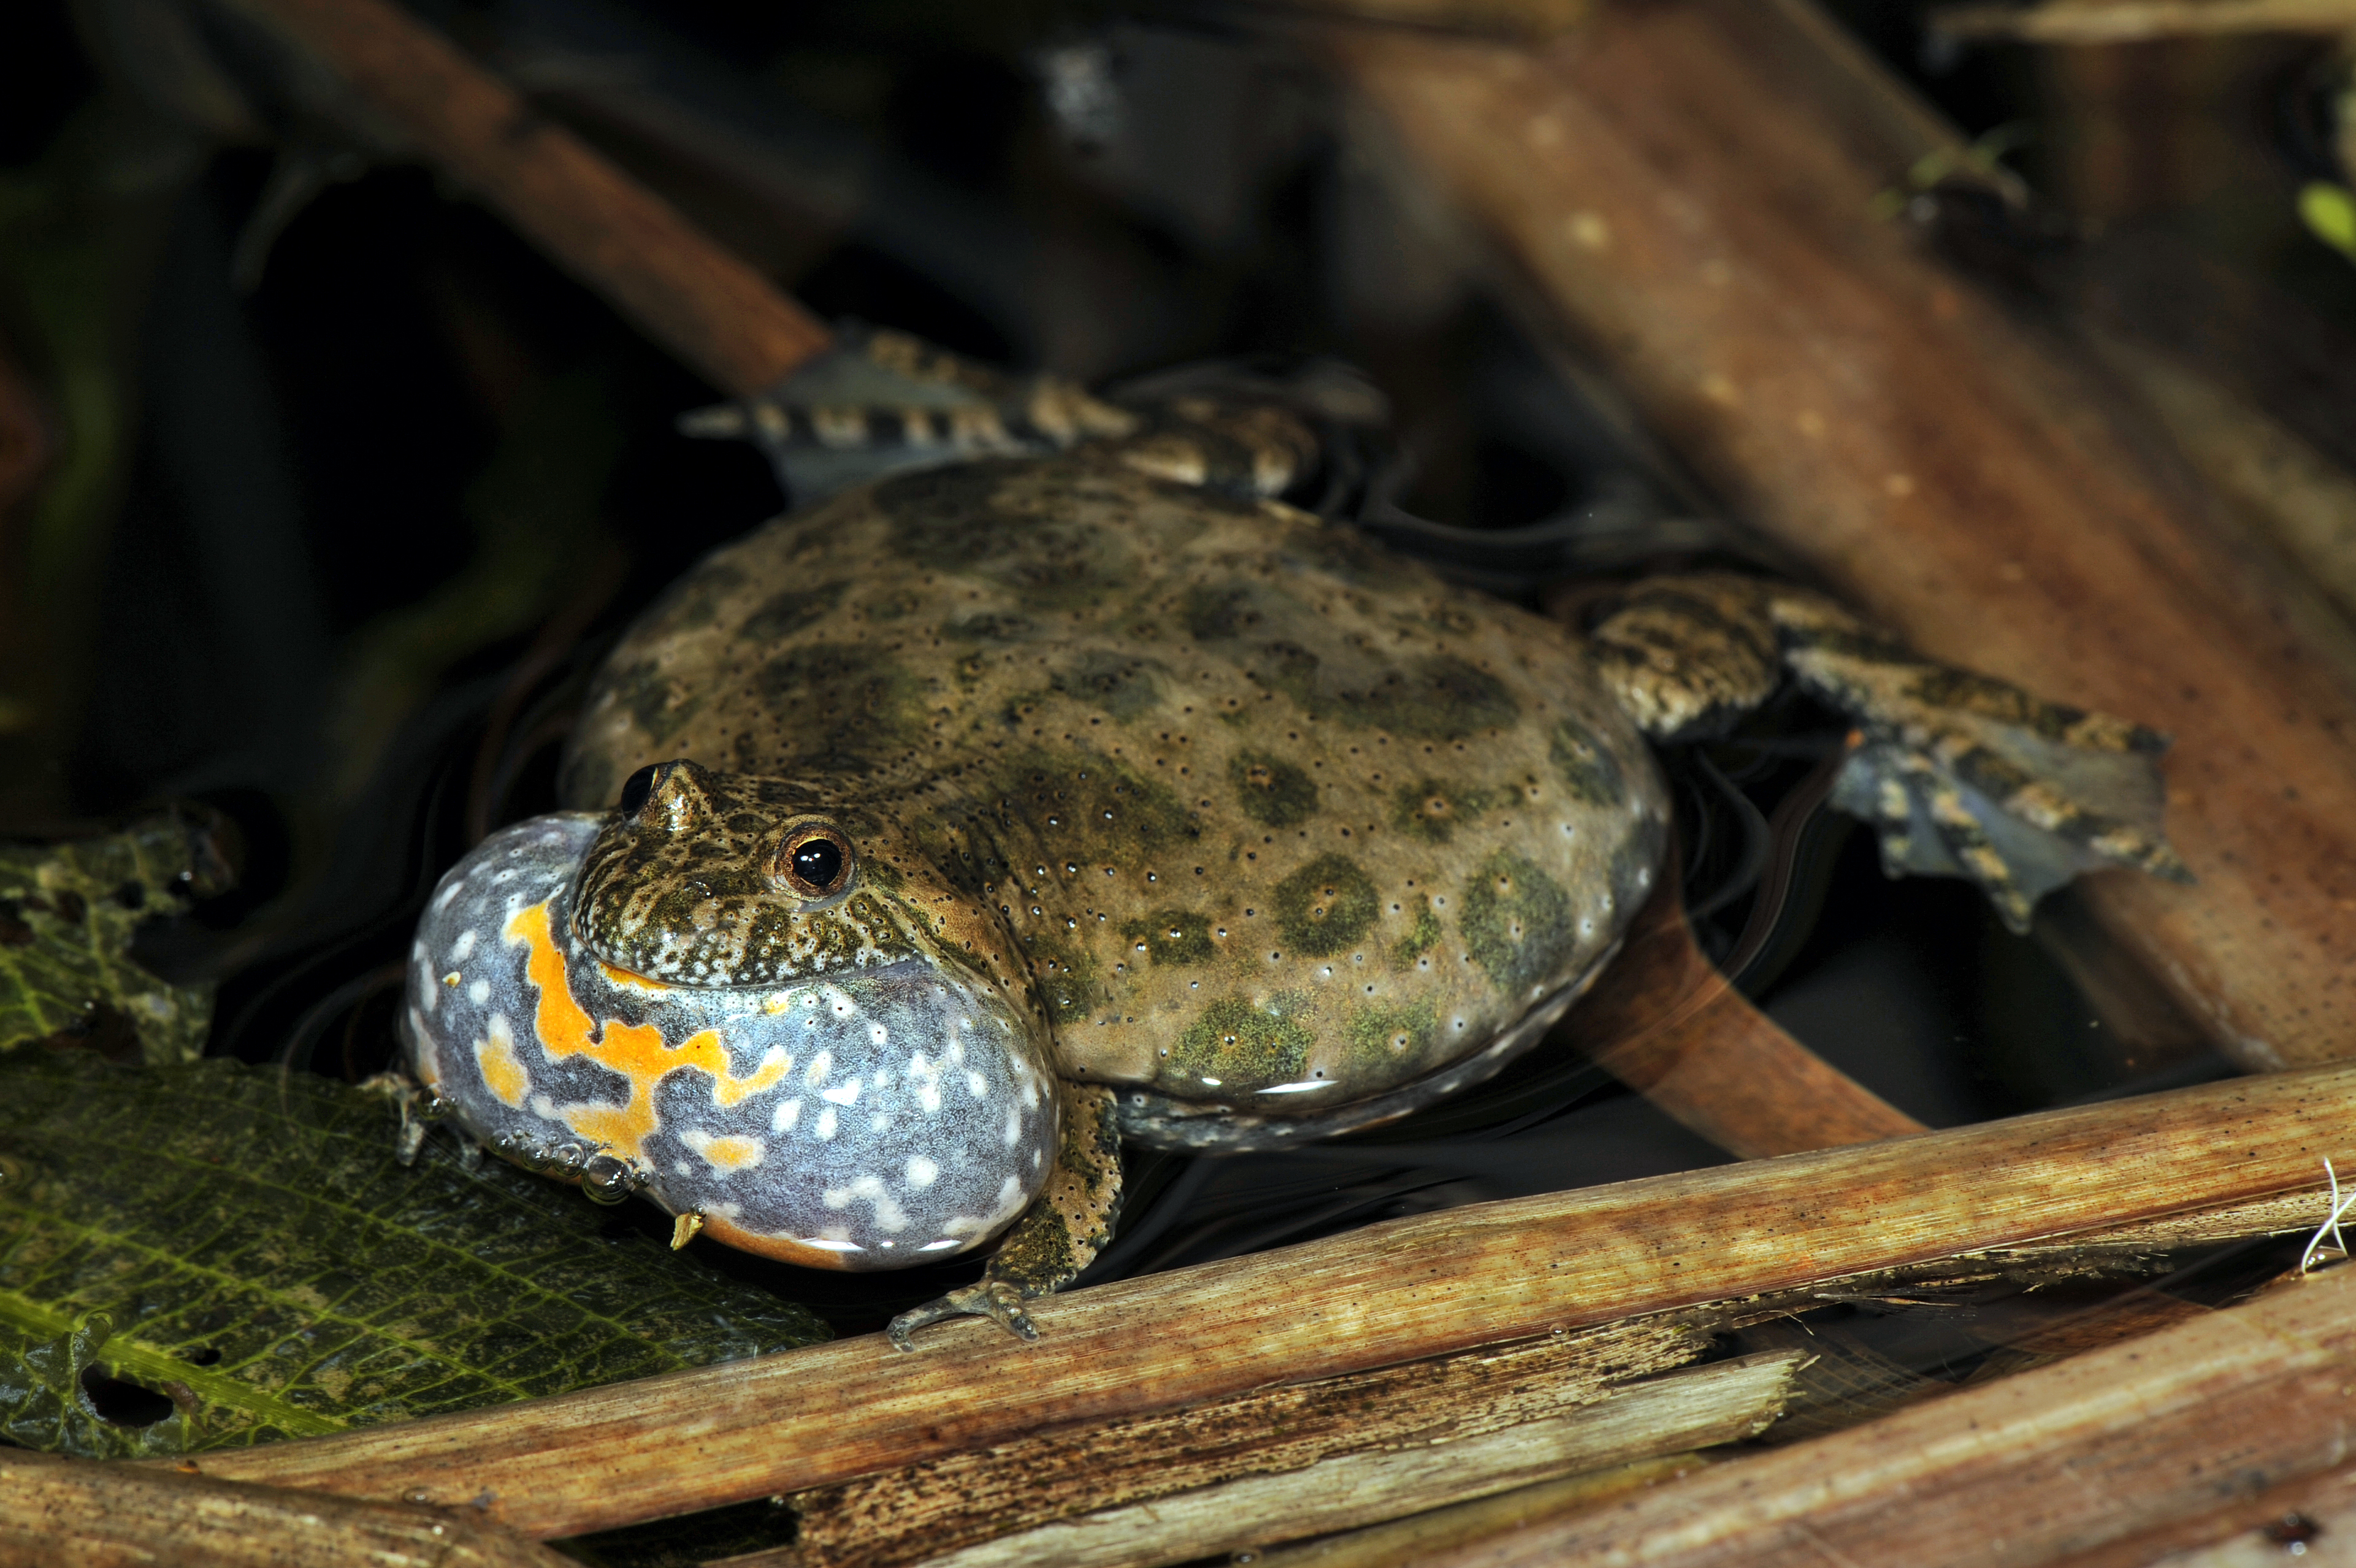 Calls of doom are in order: The fire-bellied toad (Bombina bombina) is listed as a critically endangered species on the national red list in Germany. | Benny Trapp